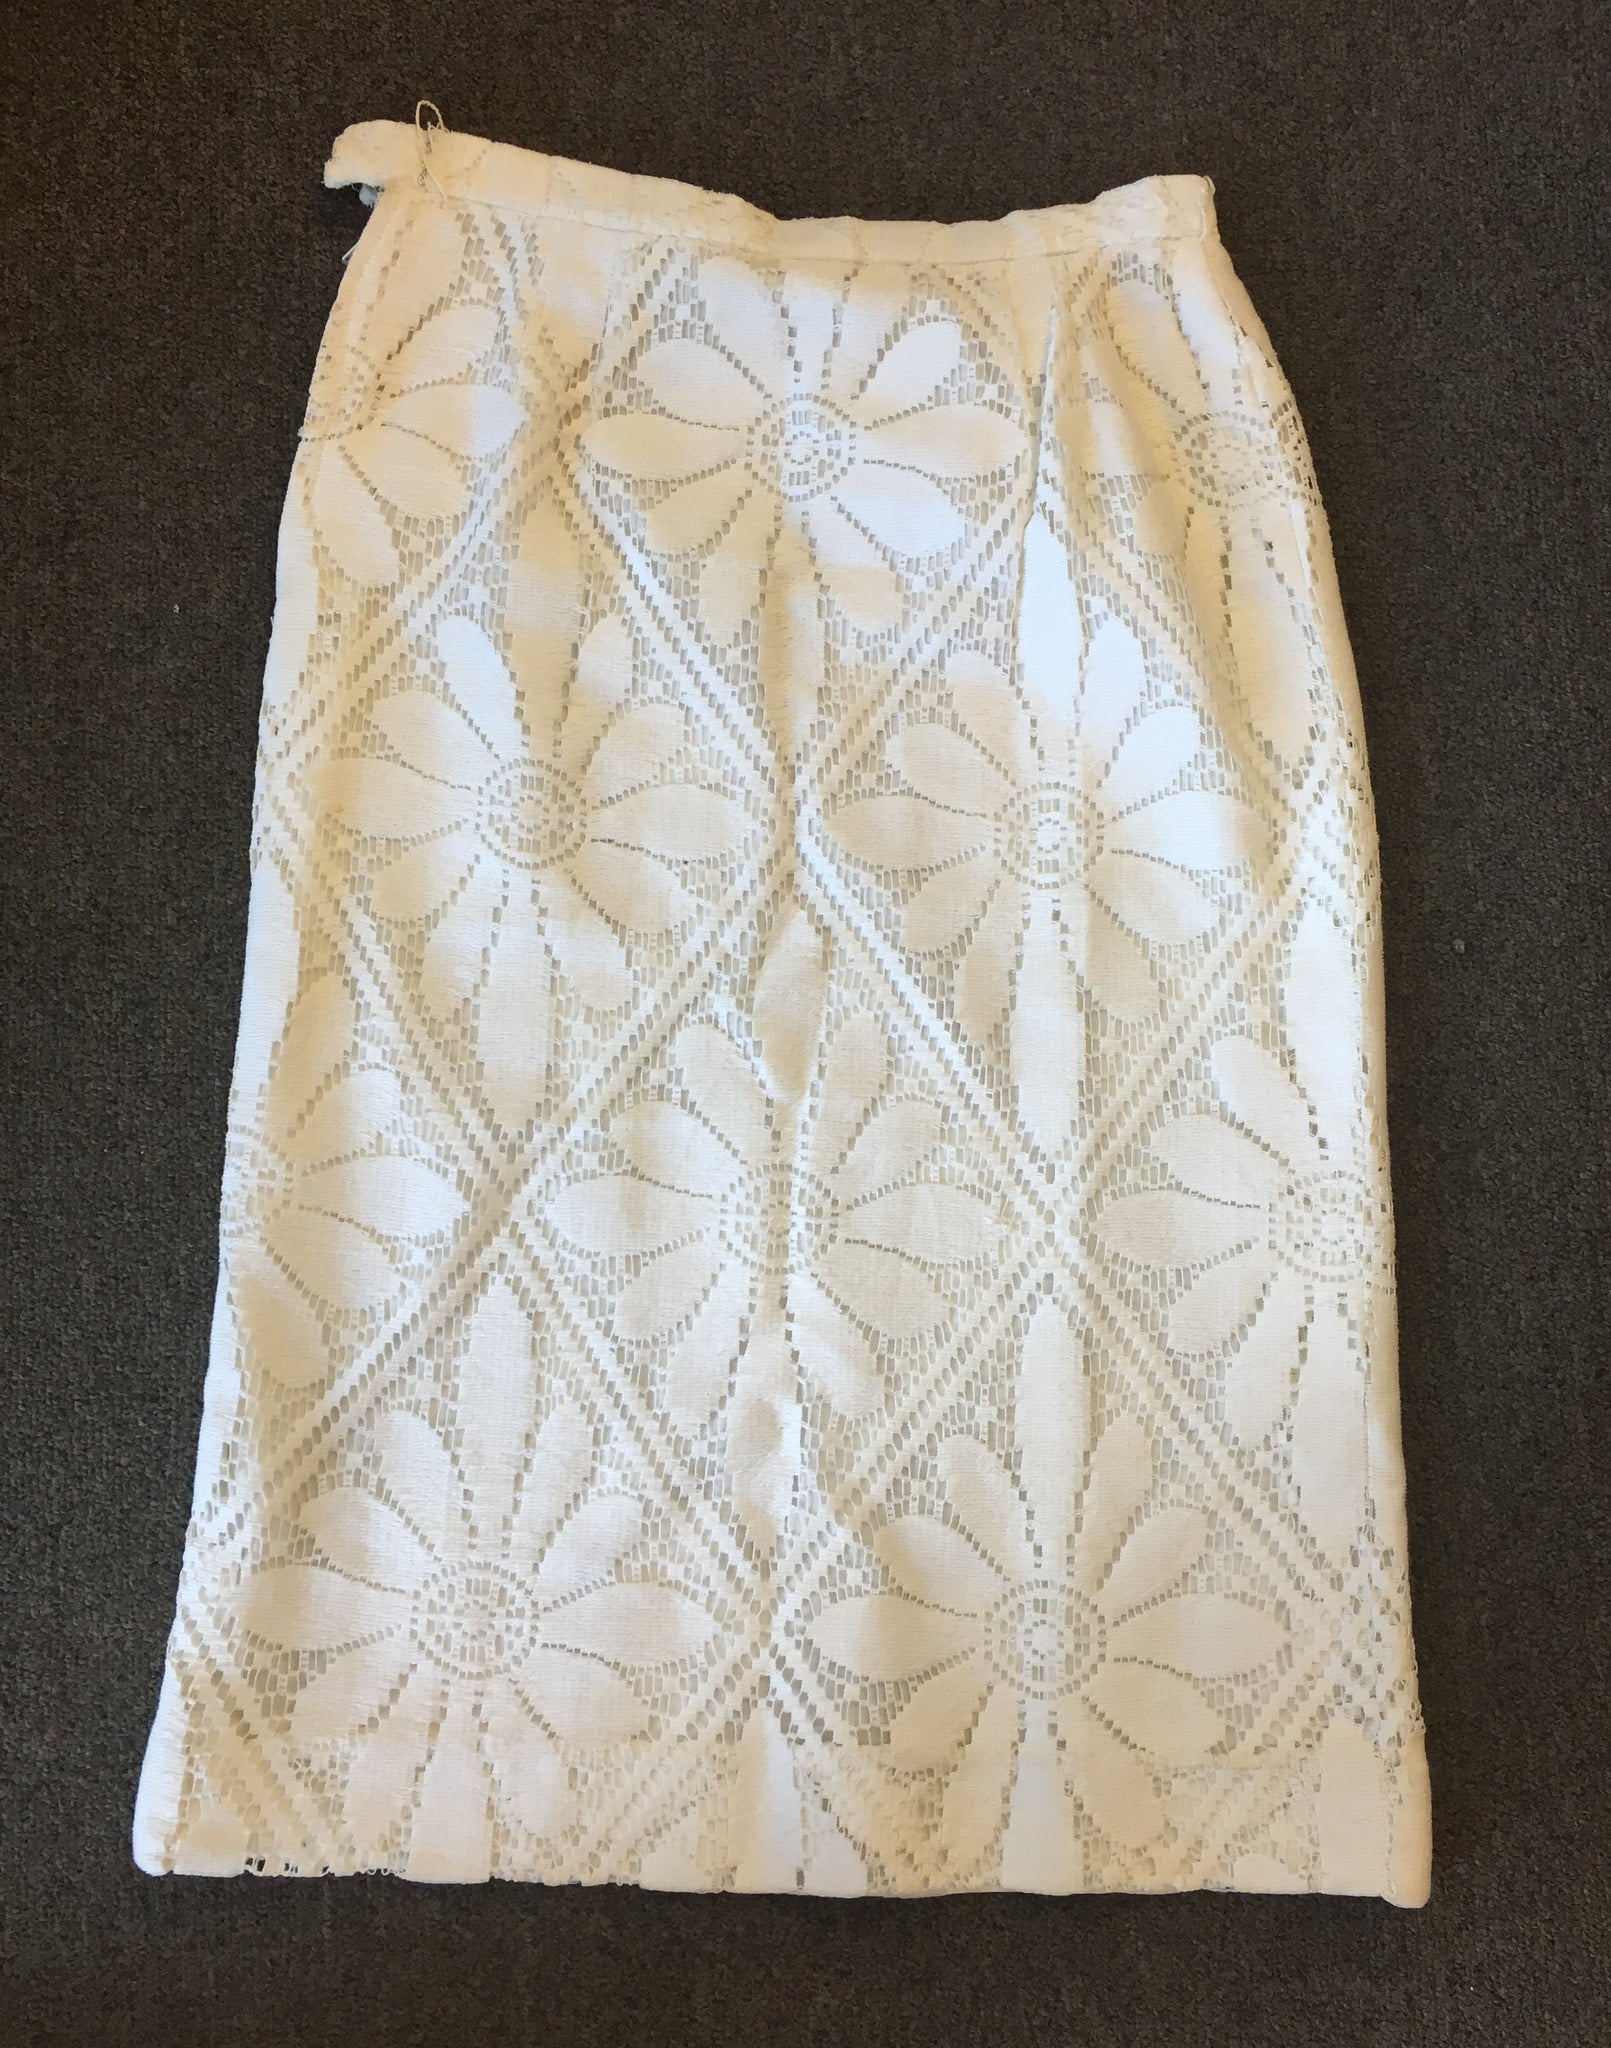 Vintage 1960's '70's White Wiggle Skirt Floral Patterned Overlay Mini